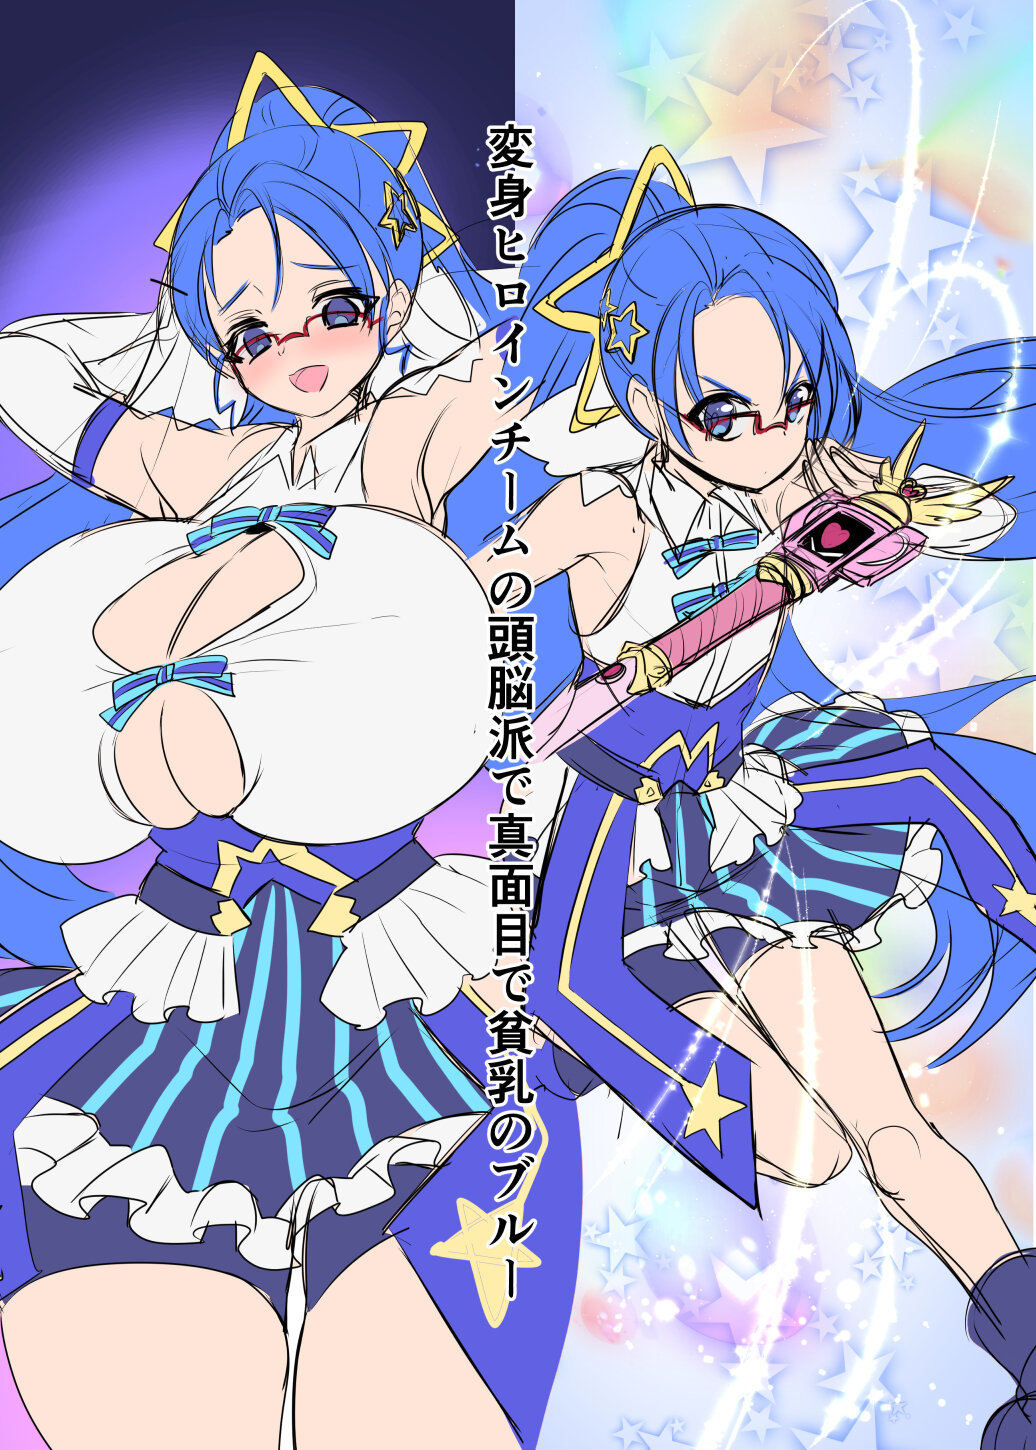 The Smart Diligent and Flat Chested Blue from the Team of Morphing Heroines - 66